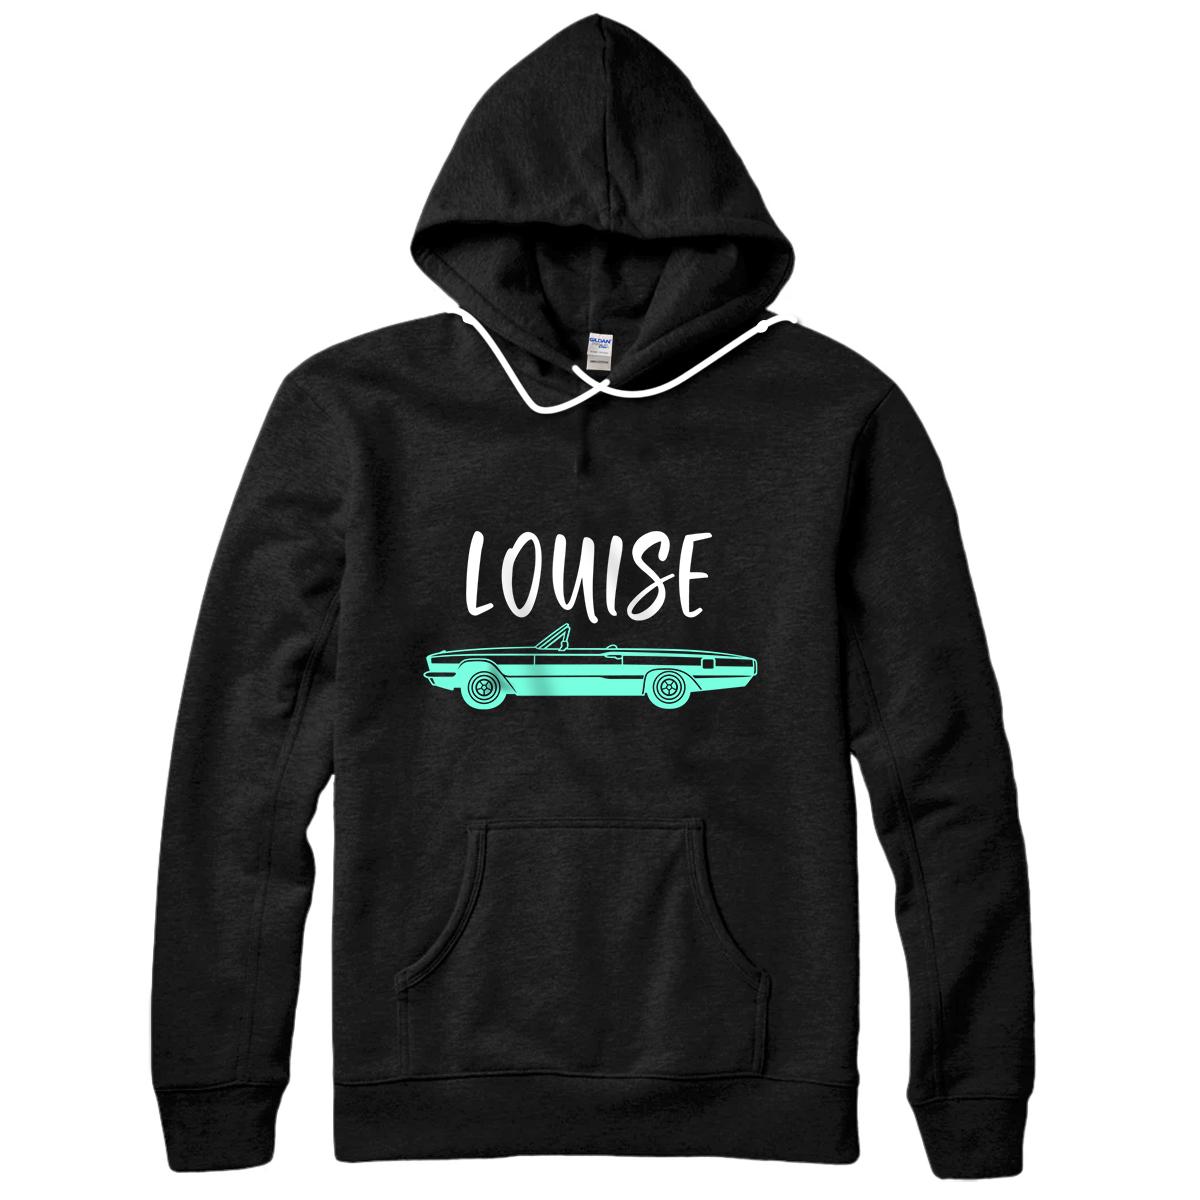 Personalized Matching Louise Thelma Best Friend Gift For BFF Pullover Hoodie